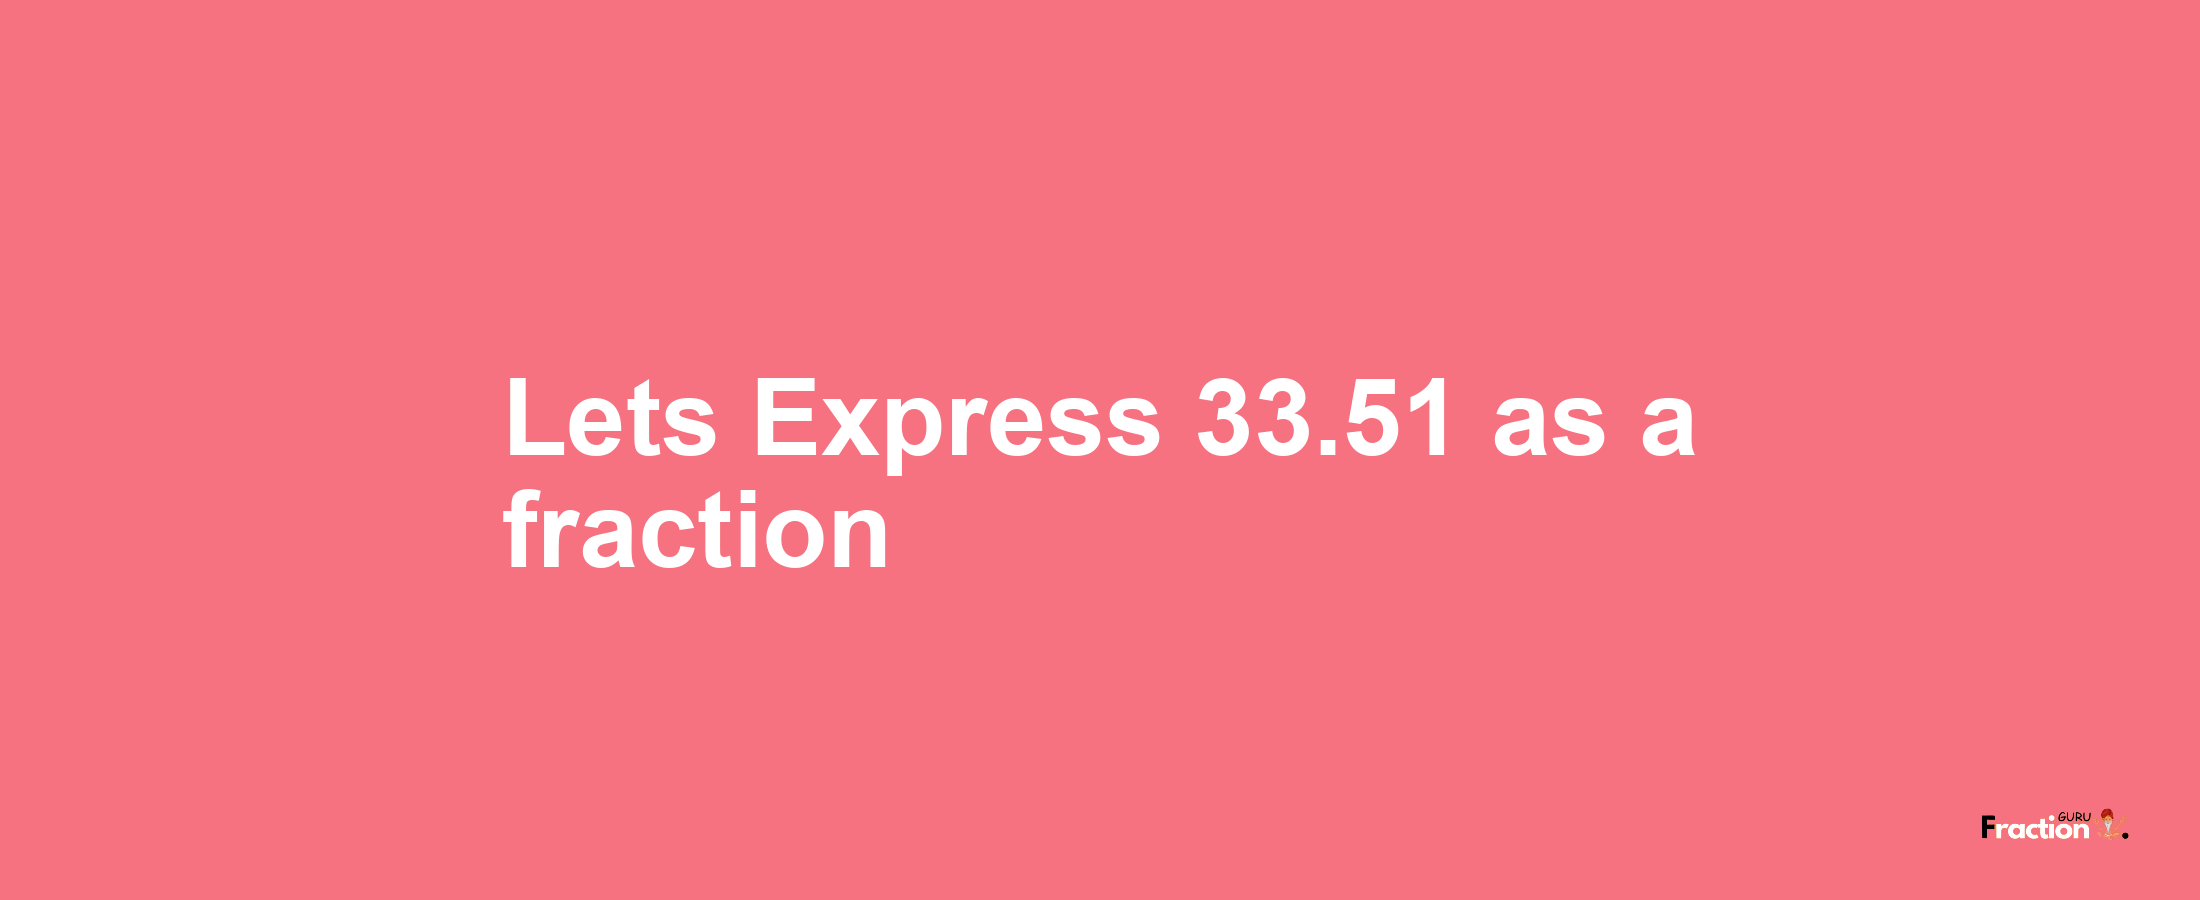 Lets Express 33.51 as afraction